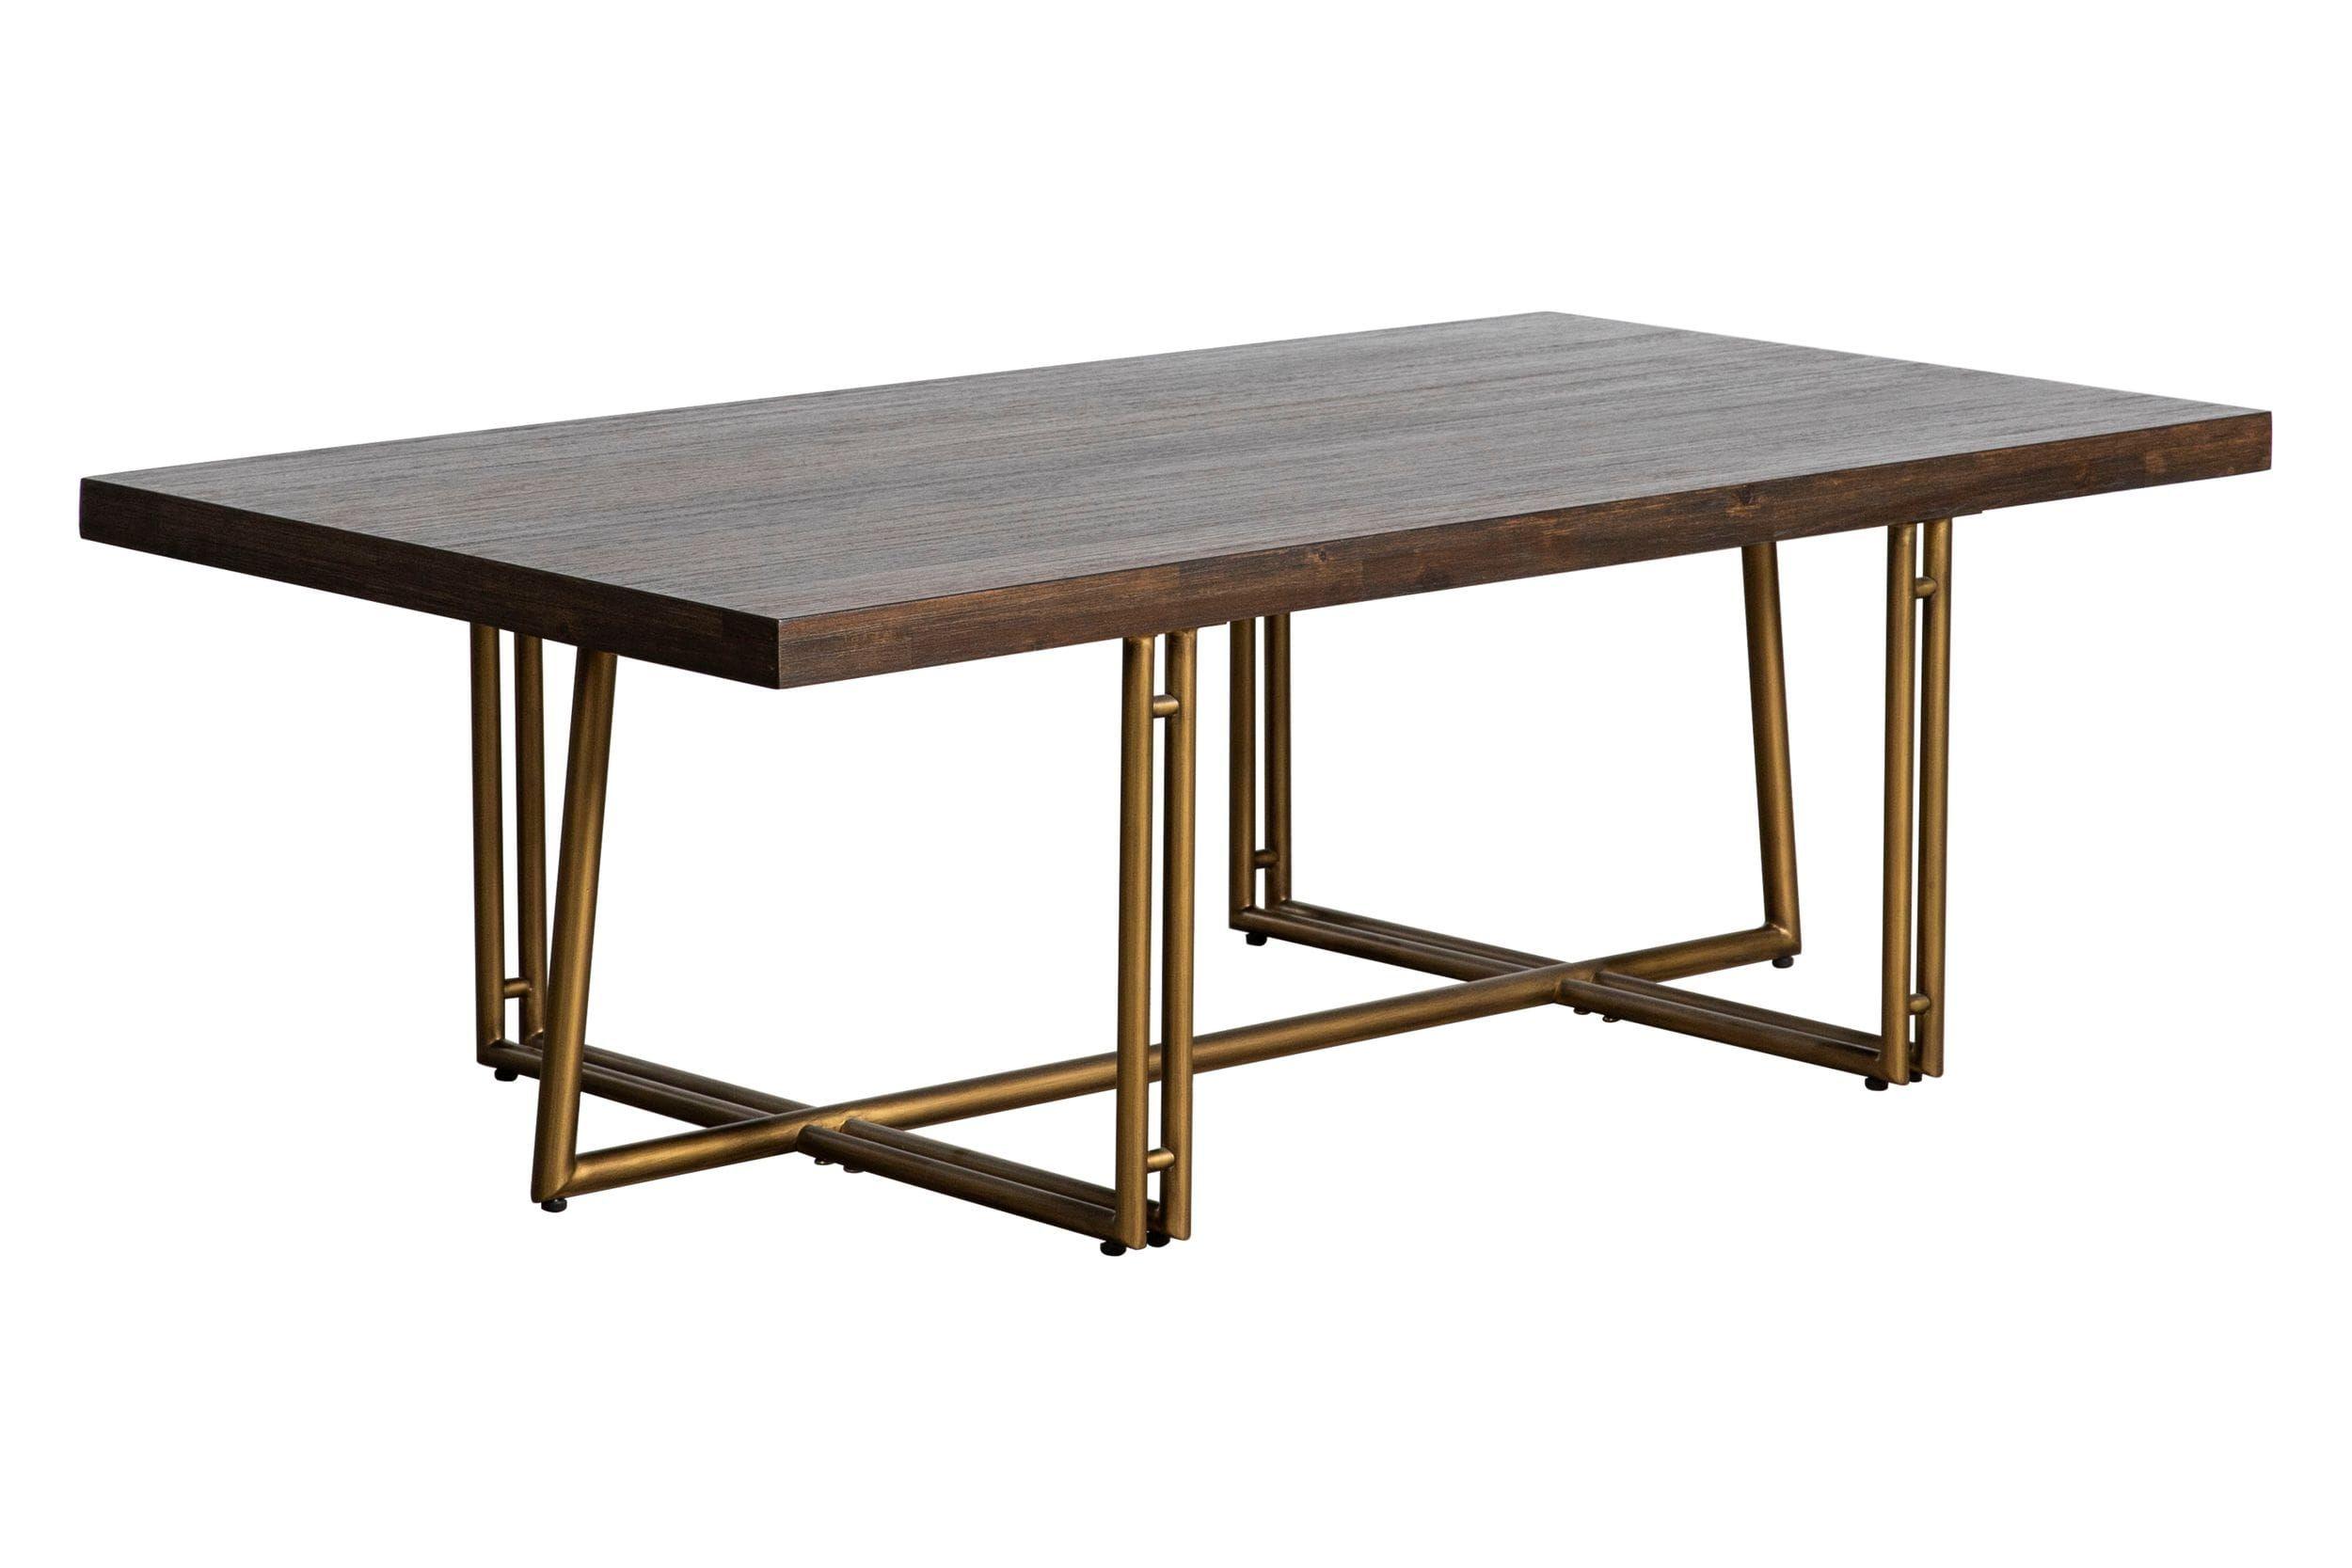 Contemporary, Modern Dining Table VGNXNYORA-ACA-DT VGNXNYORA-ACA-DT in Brown 